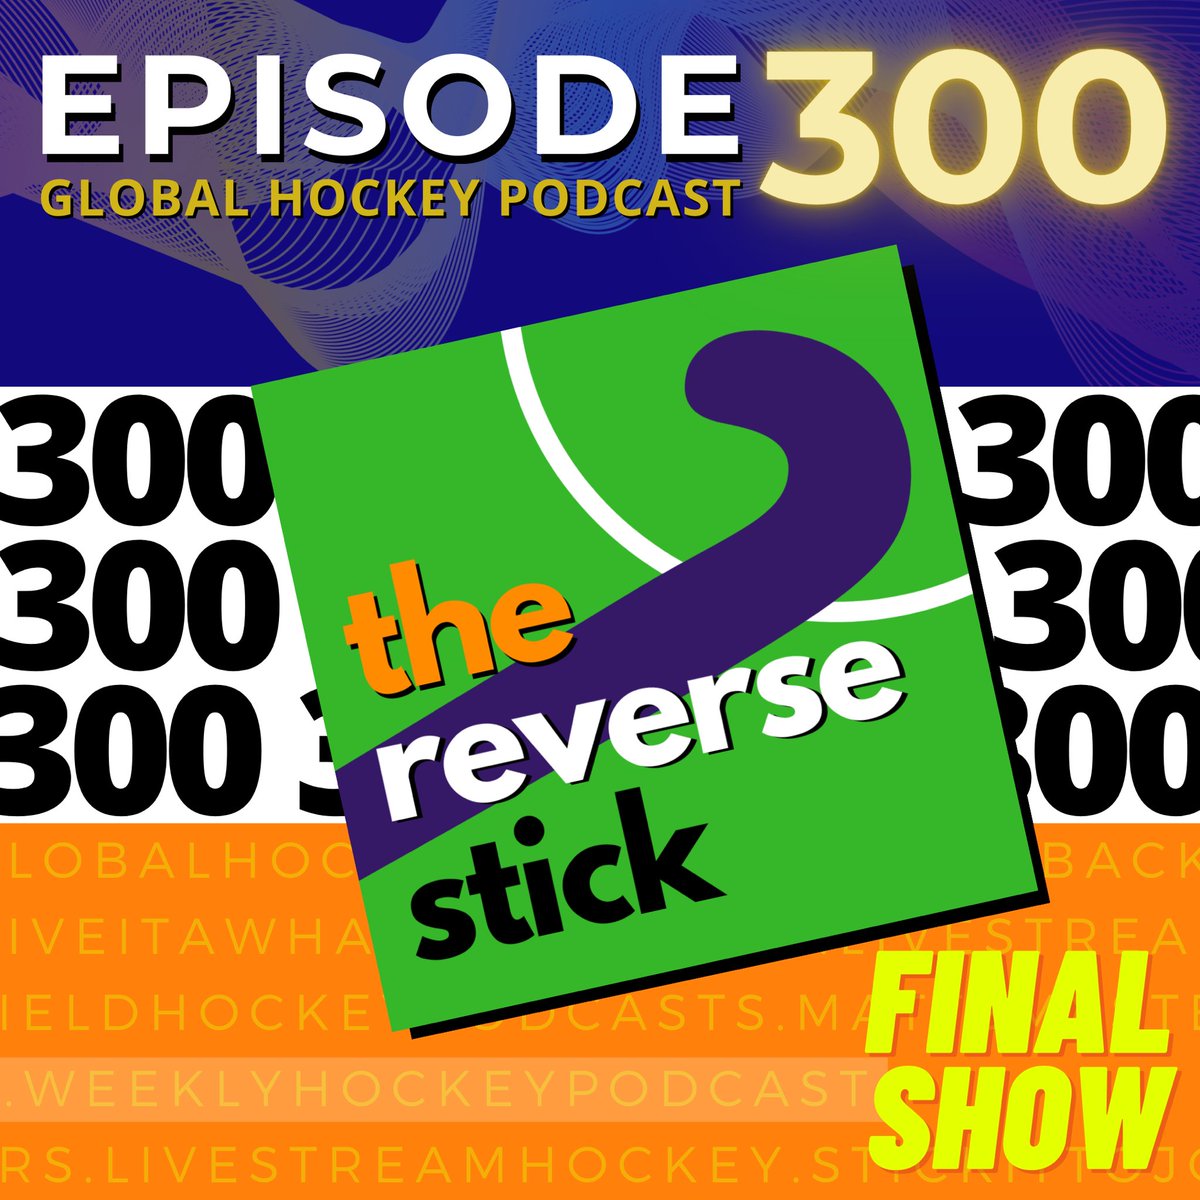 Adios. Farewell. So long. It’s time for us to blow the whistle on the #weeklyhockeypodcast Thanks for your ears, thoughts, content & support. It’s been a blast. Please excuse the indulgence, here it is. The 300th and final ep of the #glohopo 👉 tinyurl.com/2yt6w7ss